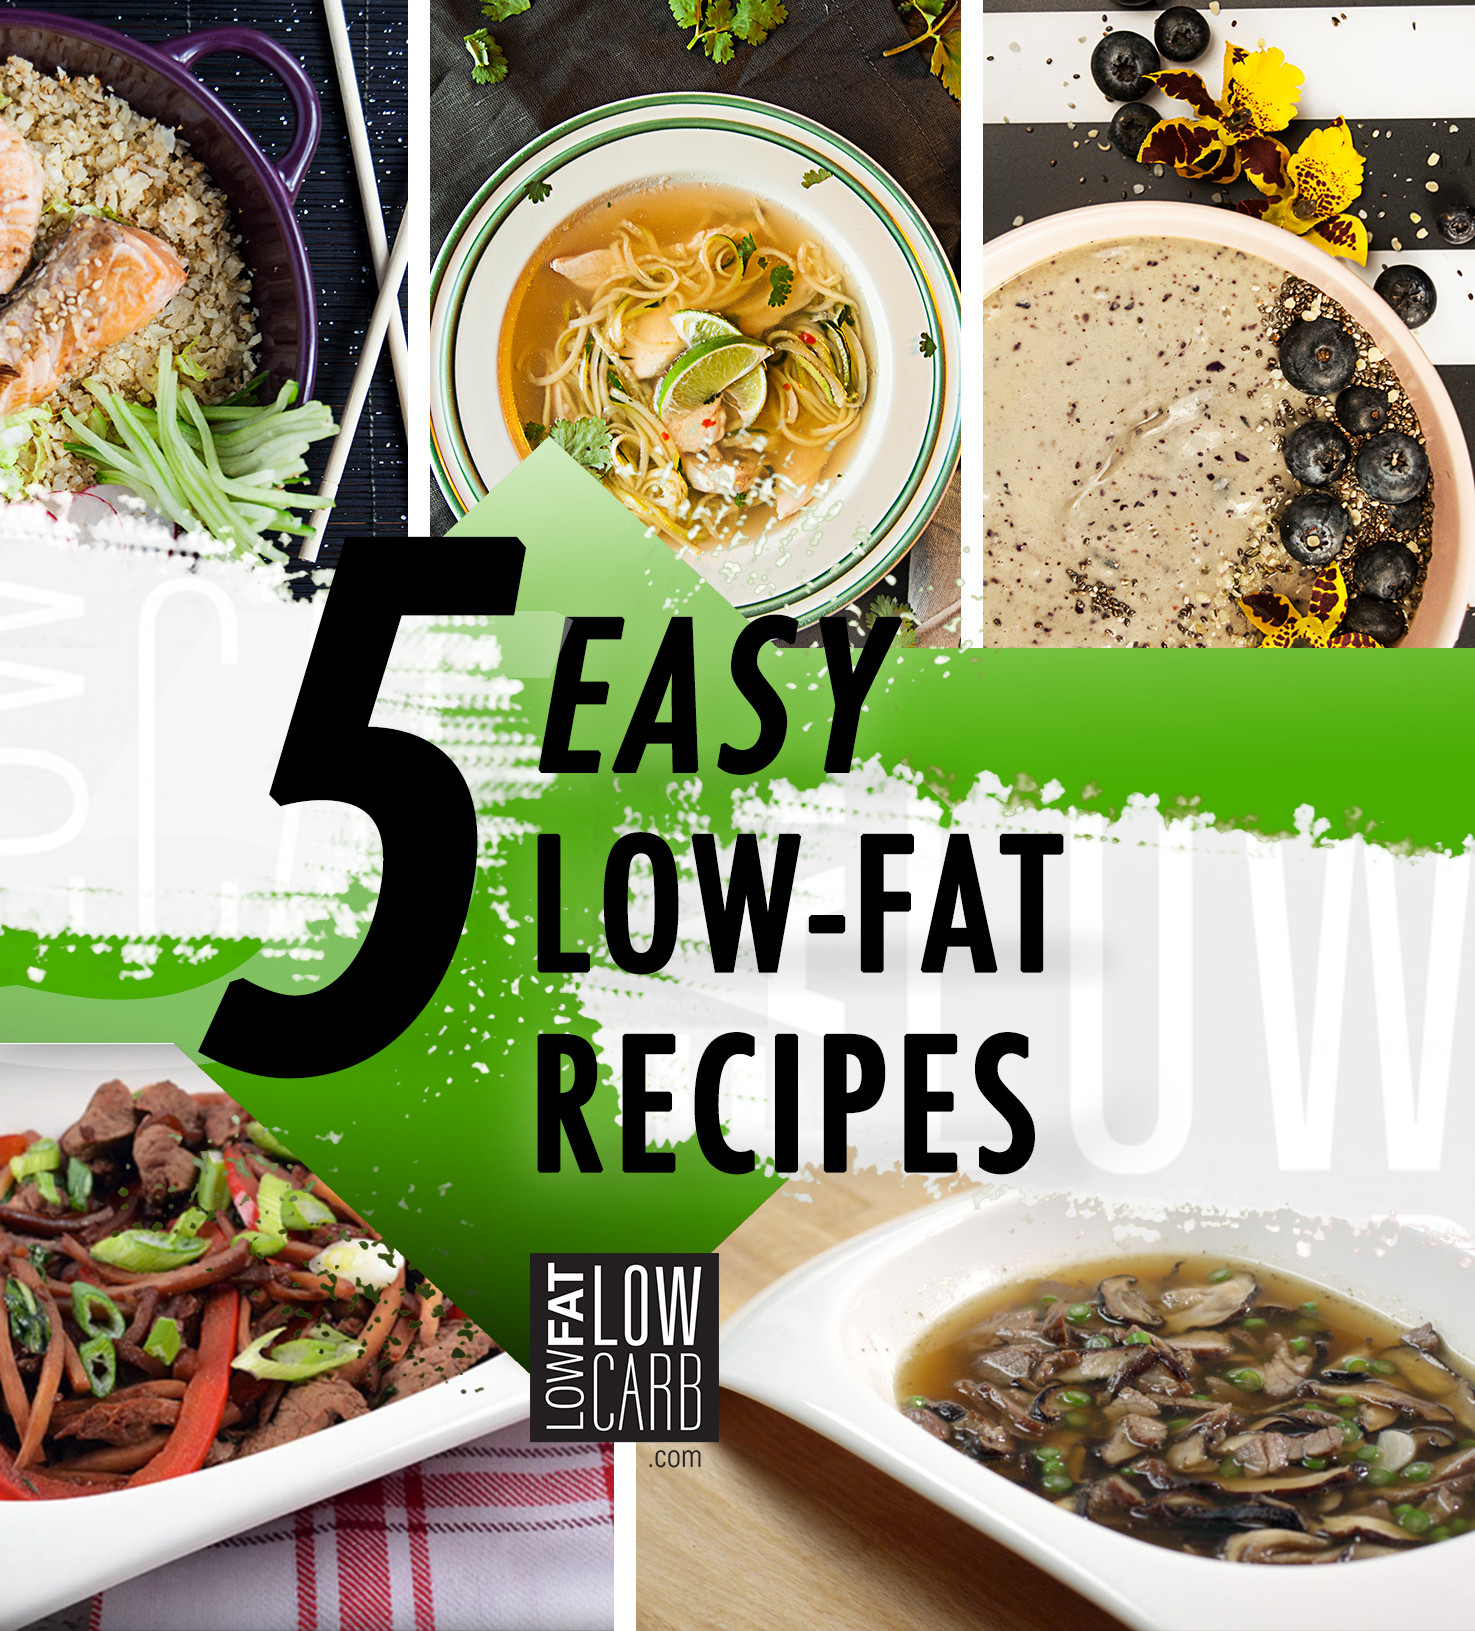 Recipes For Low Fat Diet
 5 Low Fat Diet Recipes for a Healthy Start Low Fat Low Carb